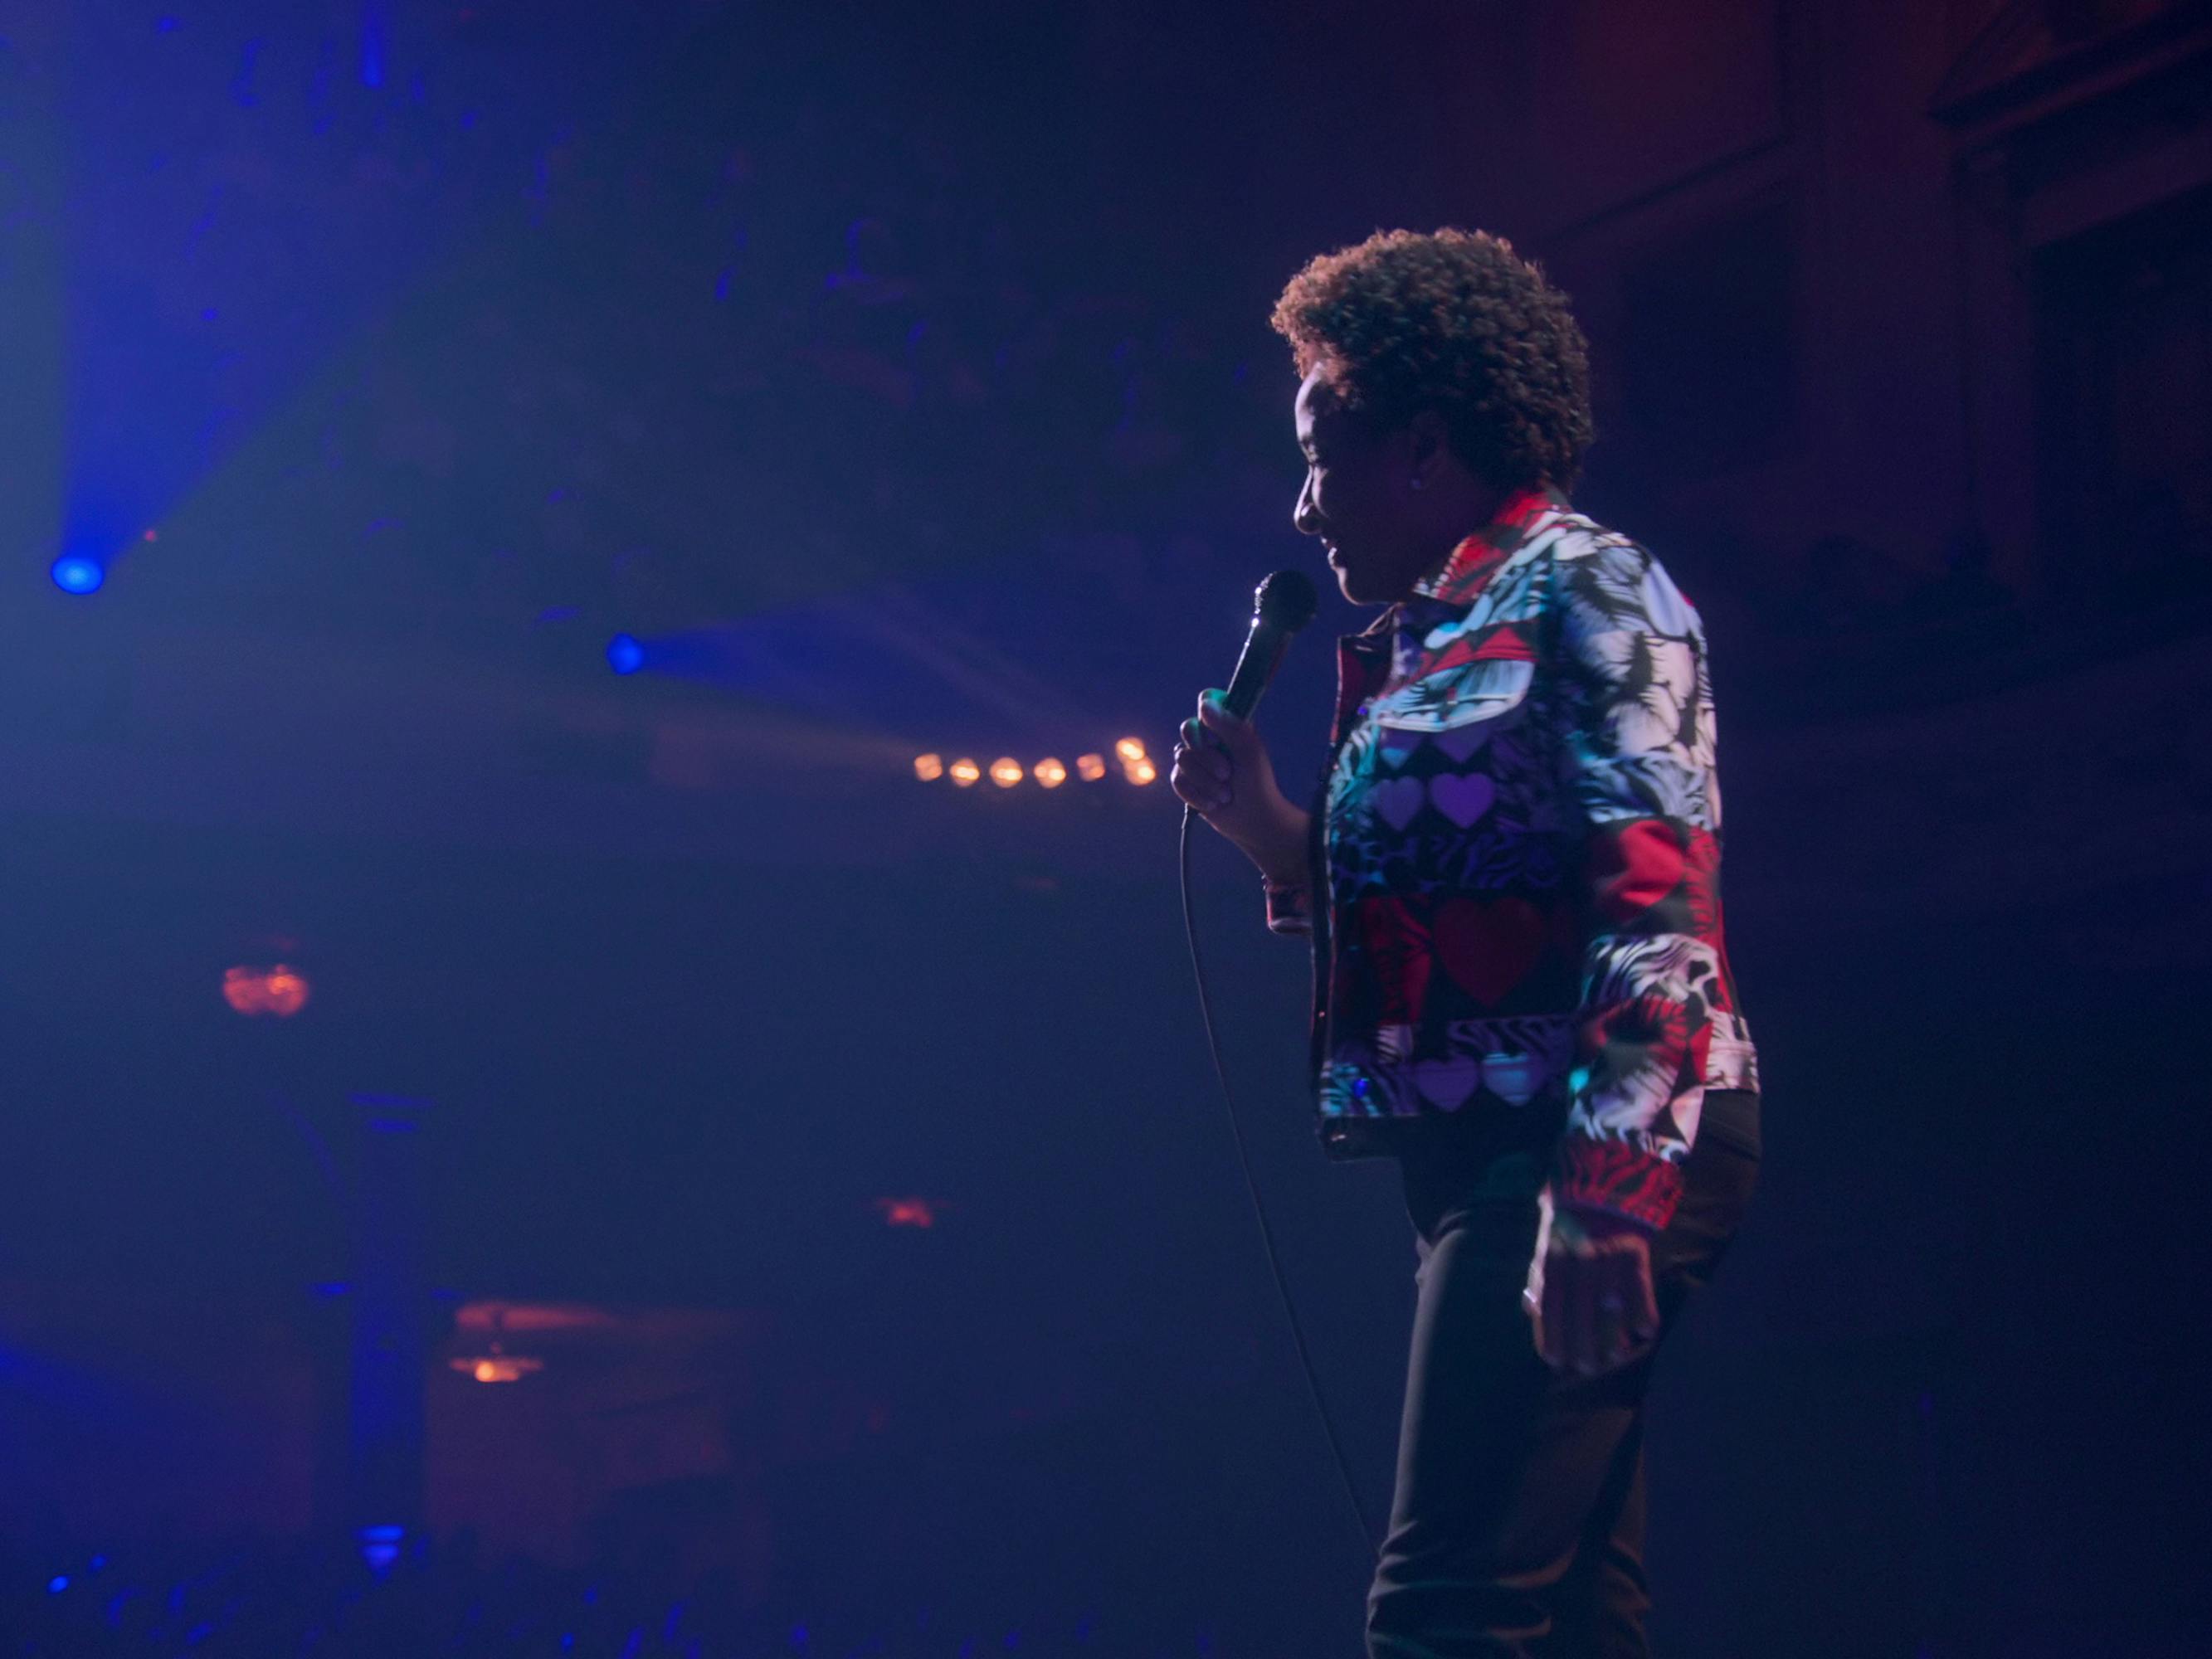 Wanda Sykes wears a patterned suit and stands on a foggy stage. 